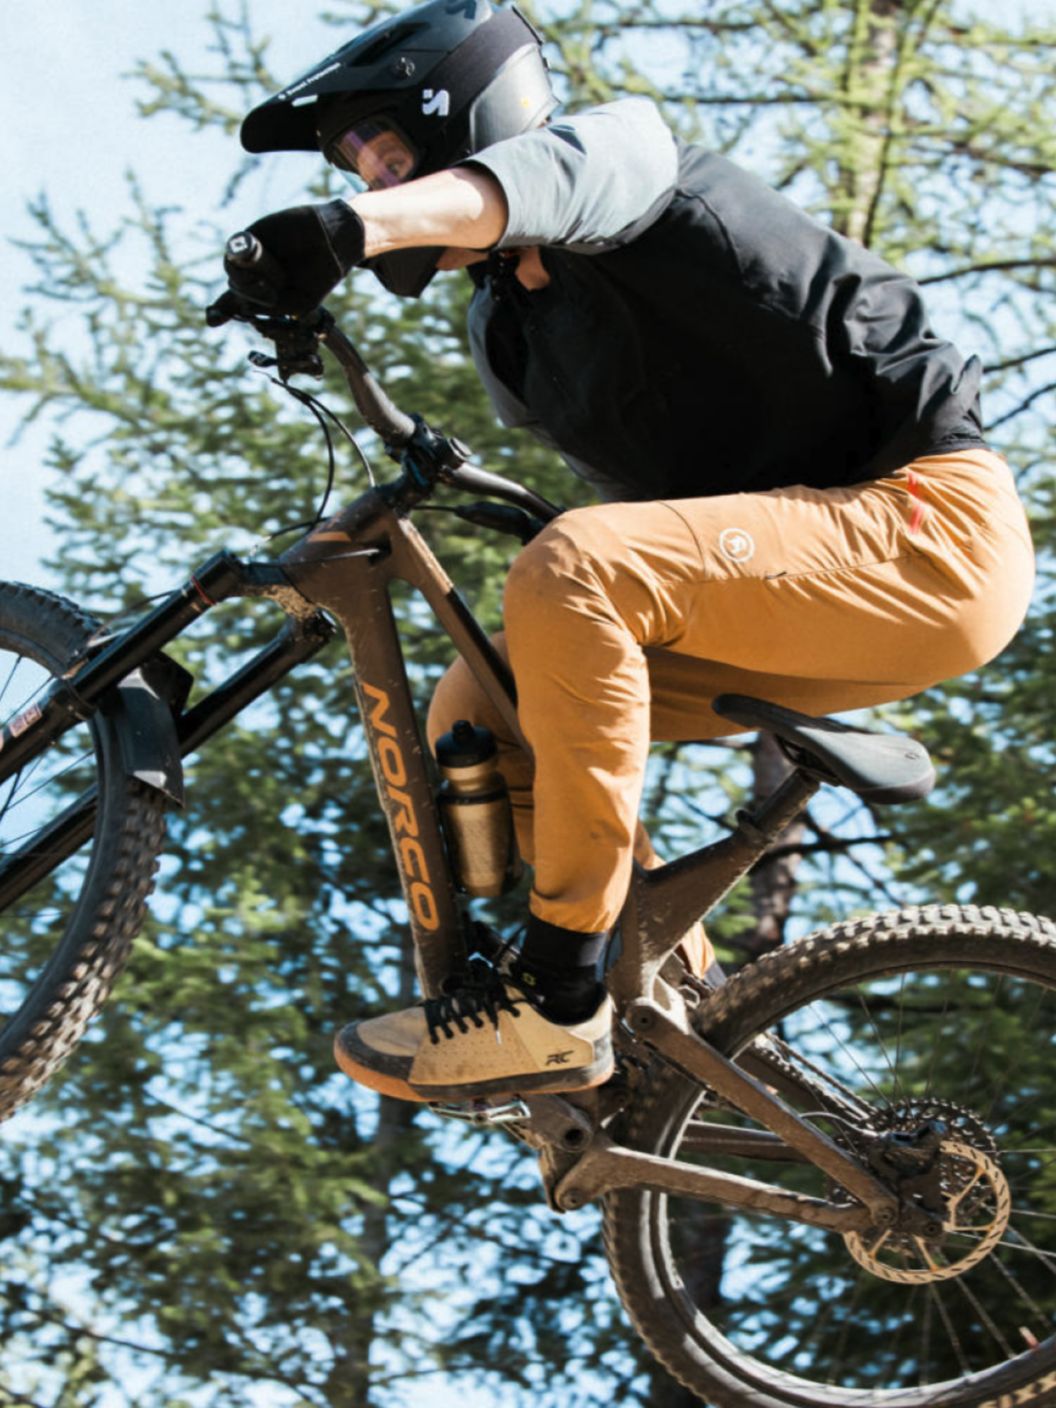 A bike rider catches air and prepares to land. 